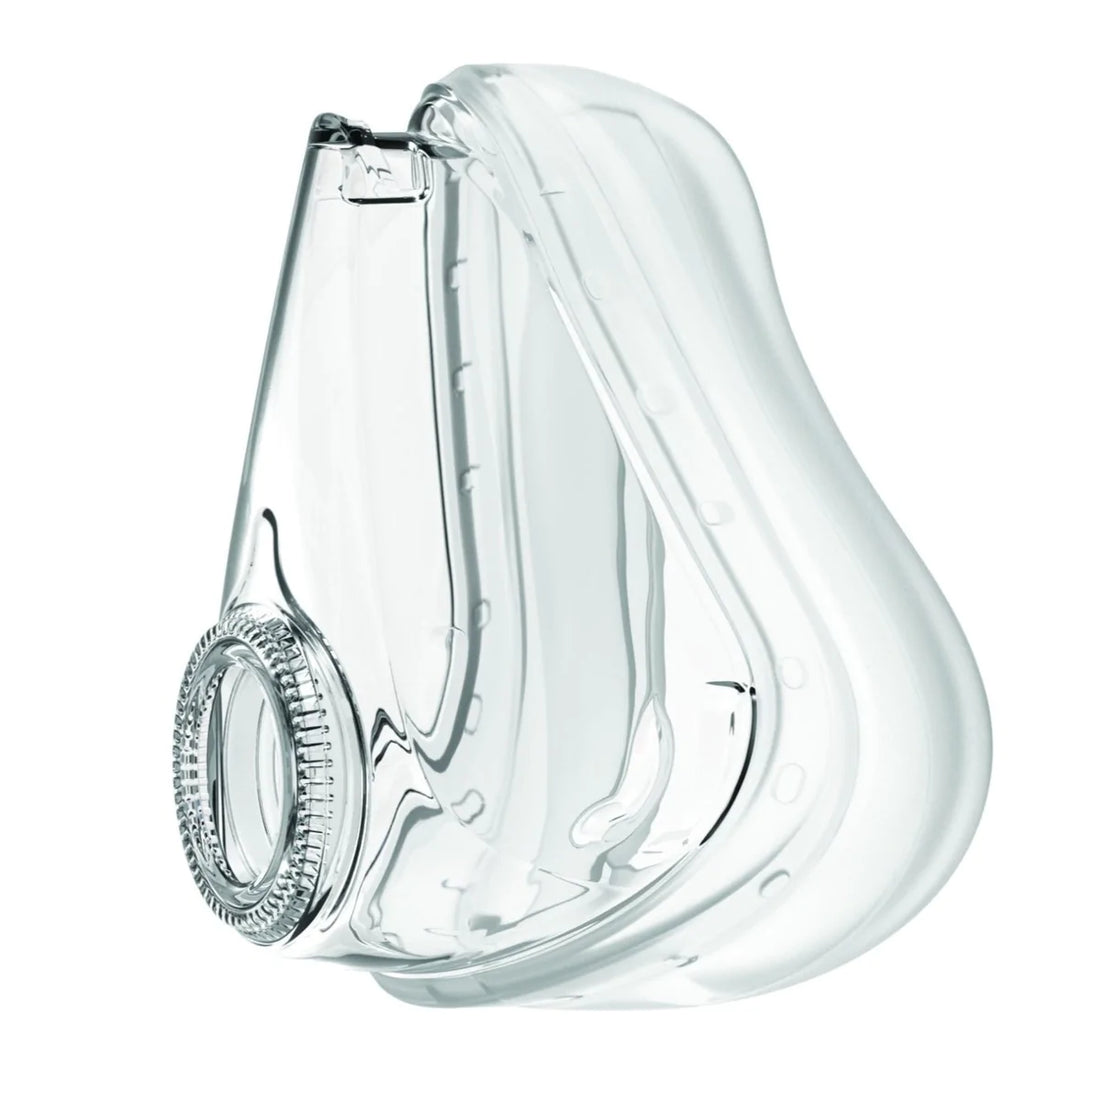 AirFit F10 - Full Face CPAP Mask with Headgear